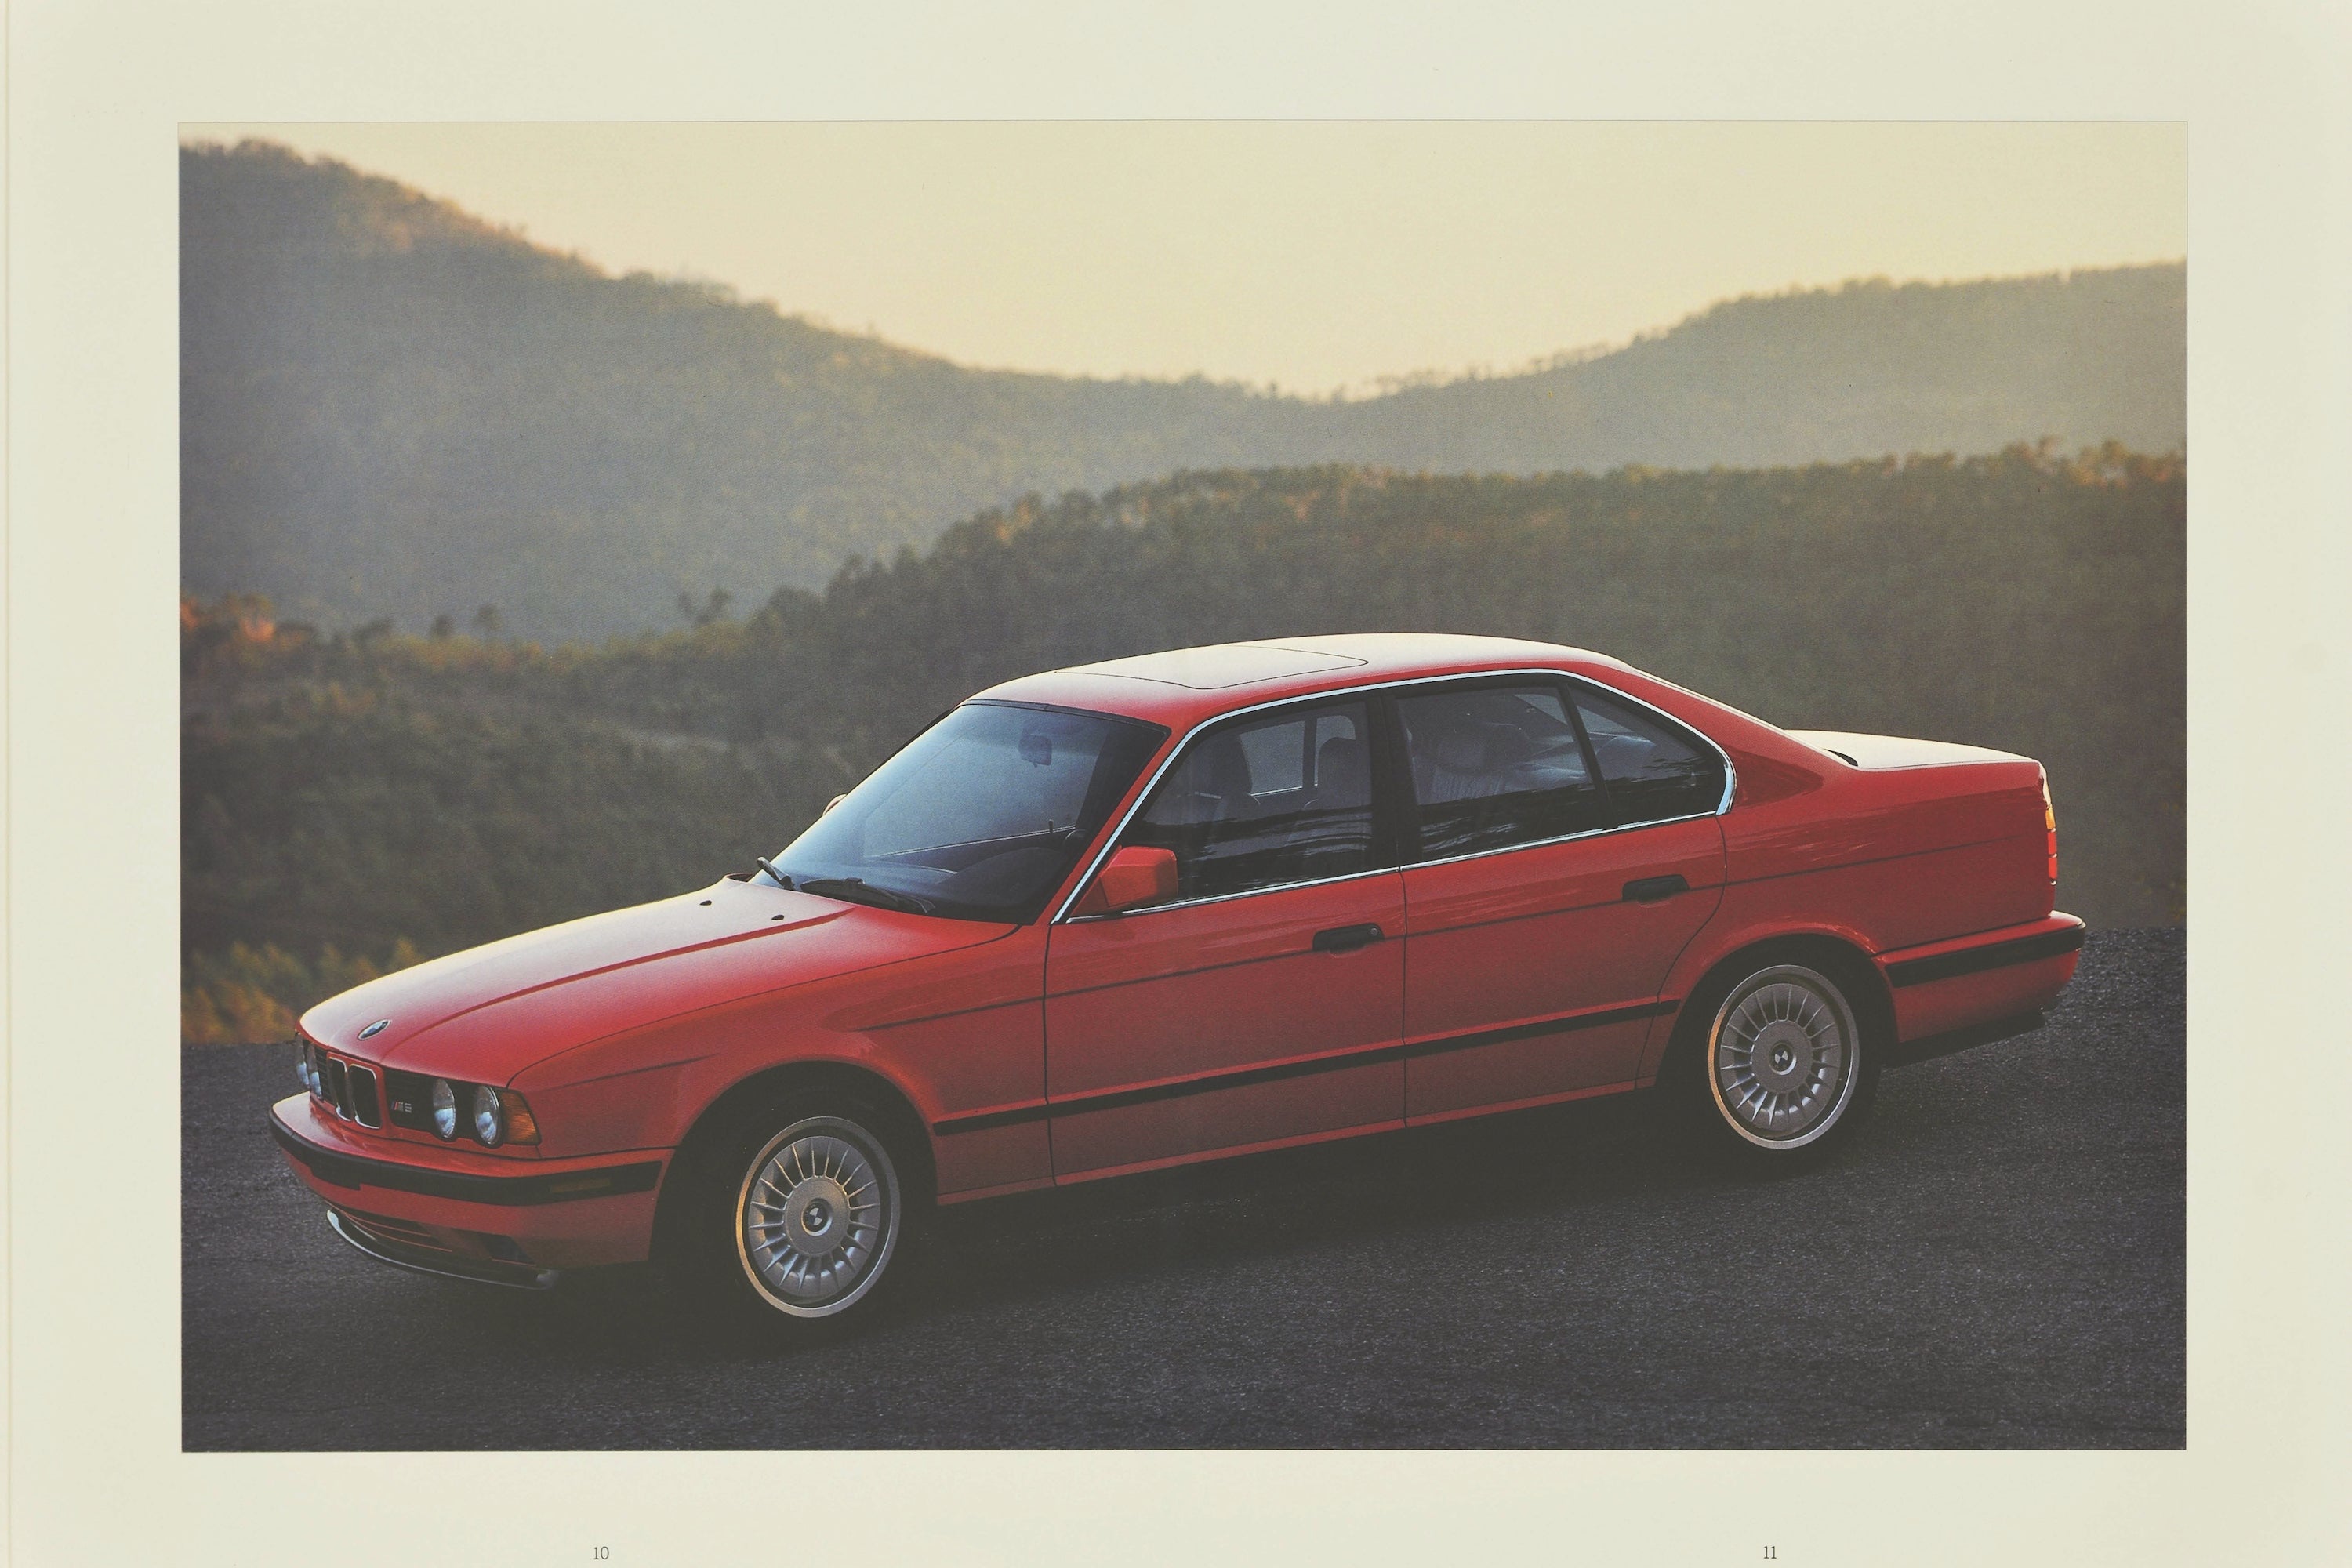 journals/kith-for-bmw-2020-39